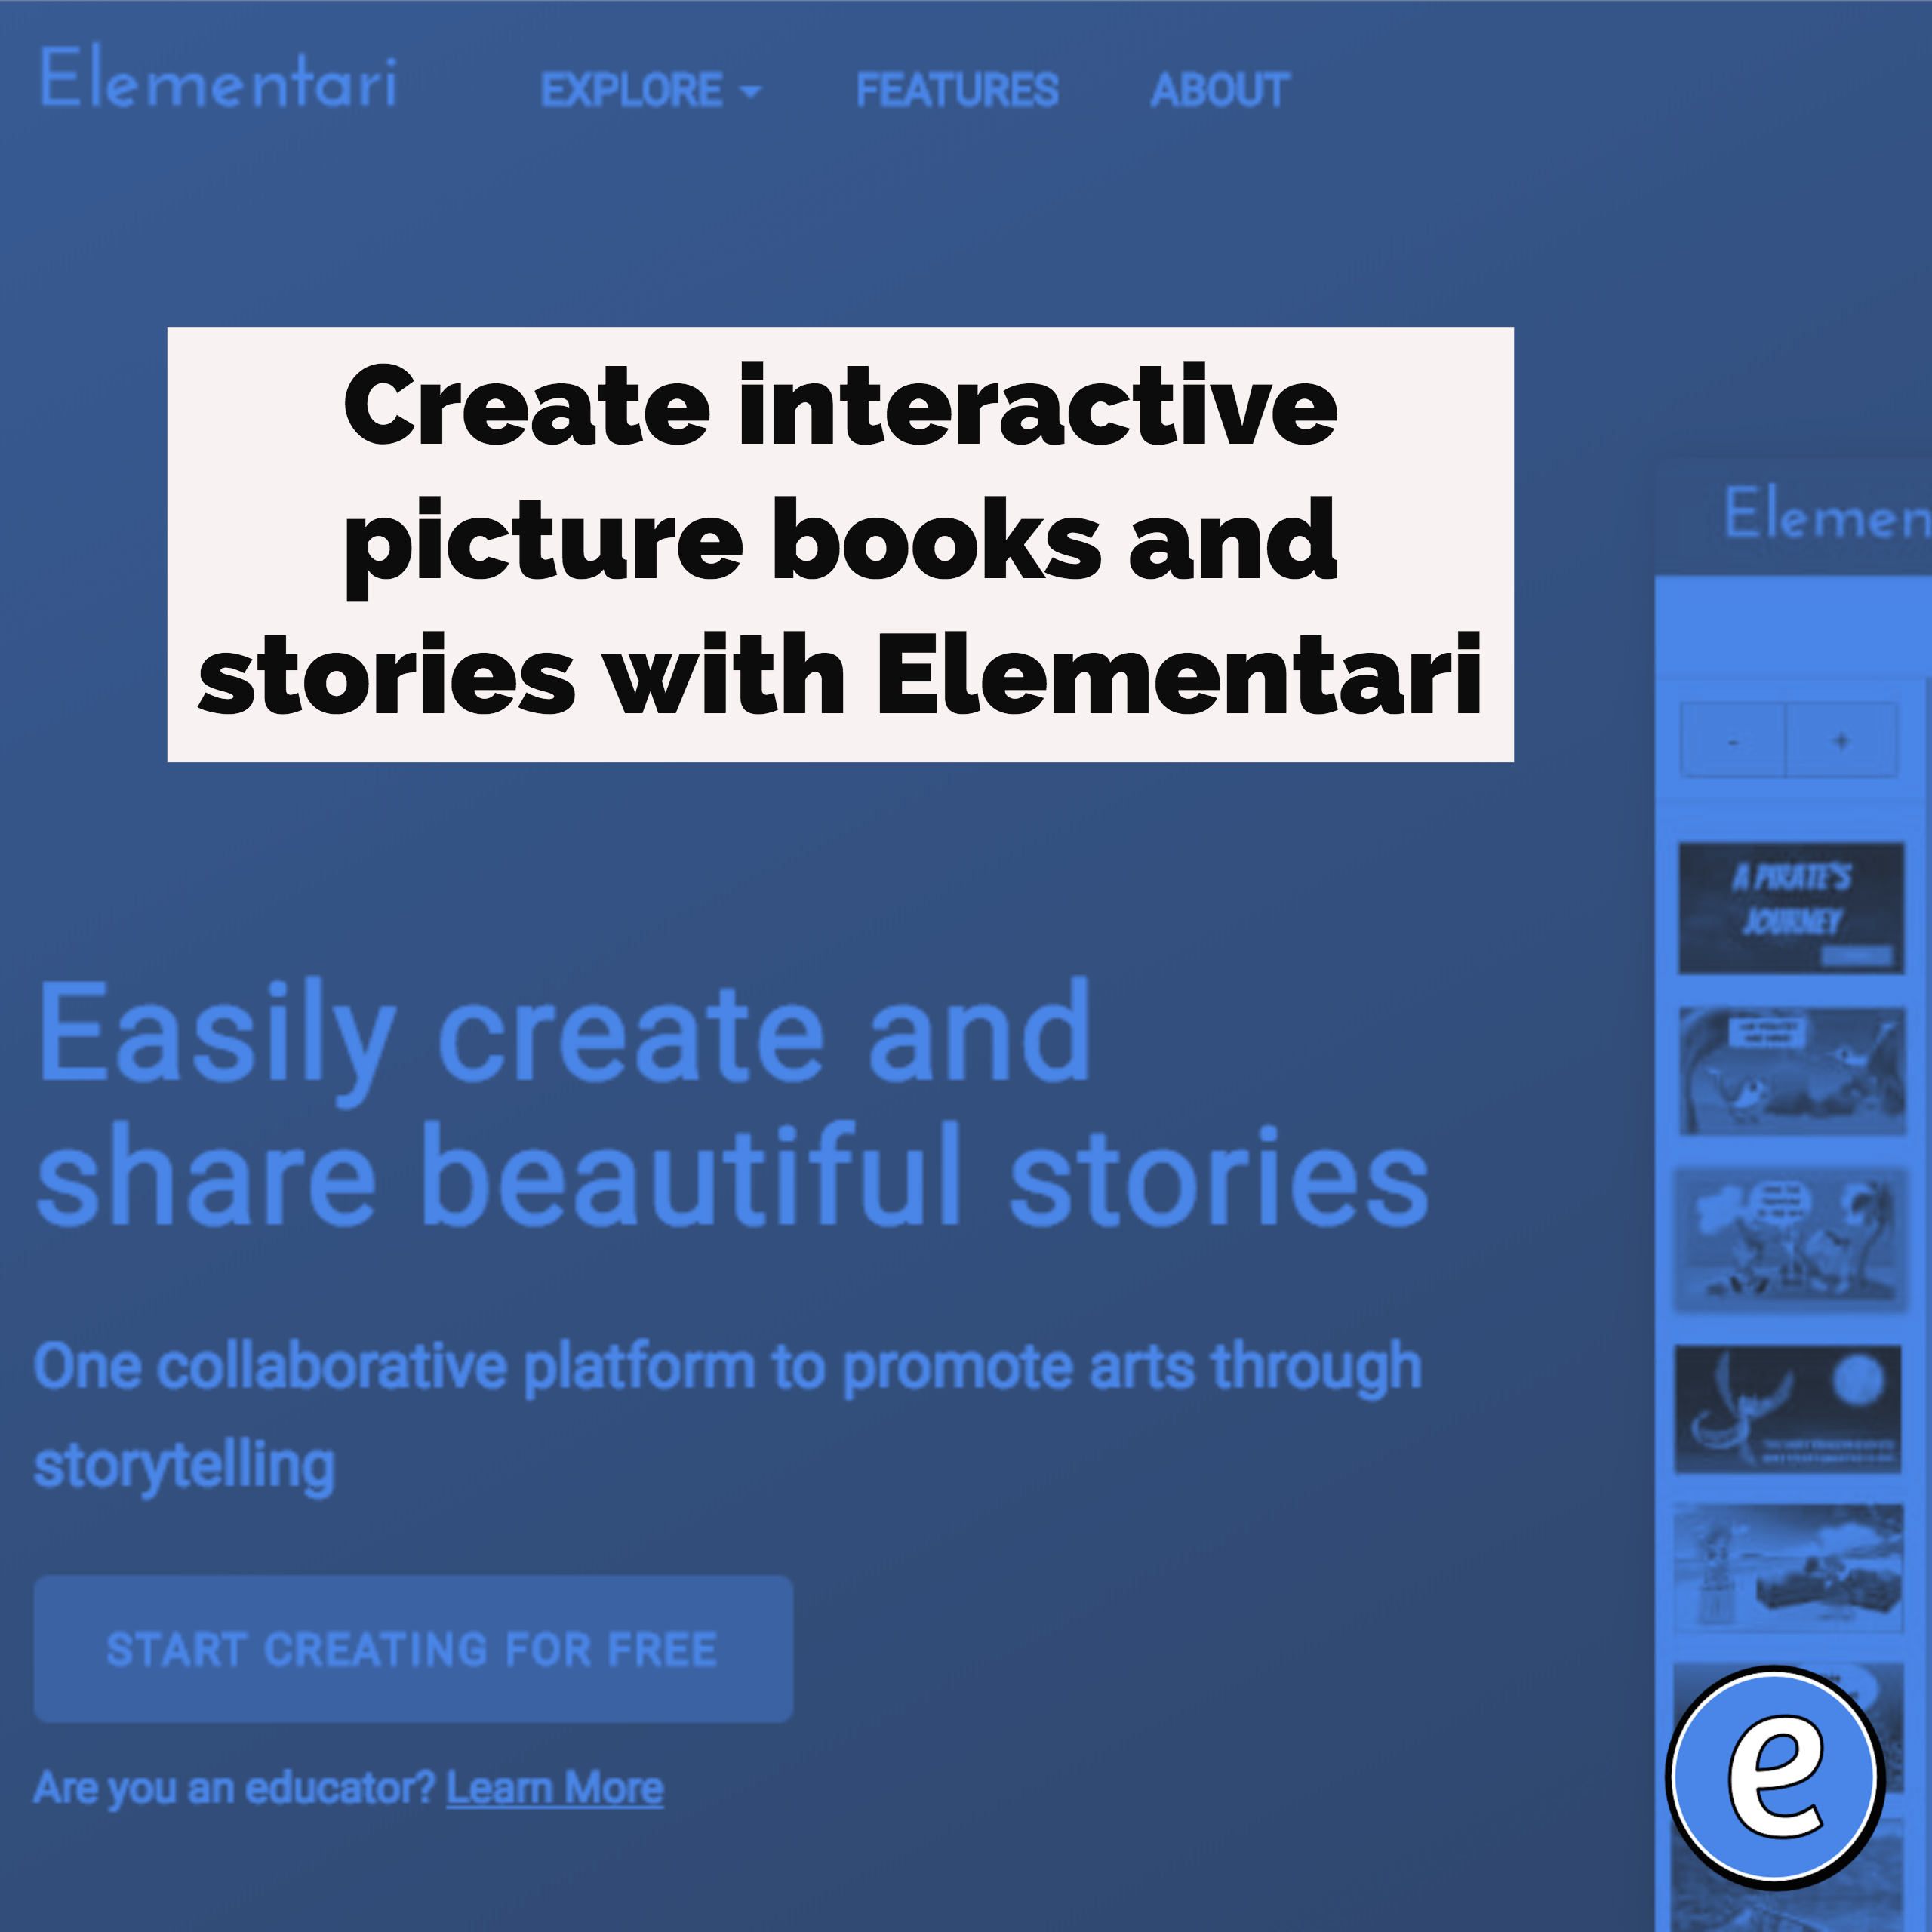 Create interactive picture books and stories with Elementari